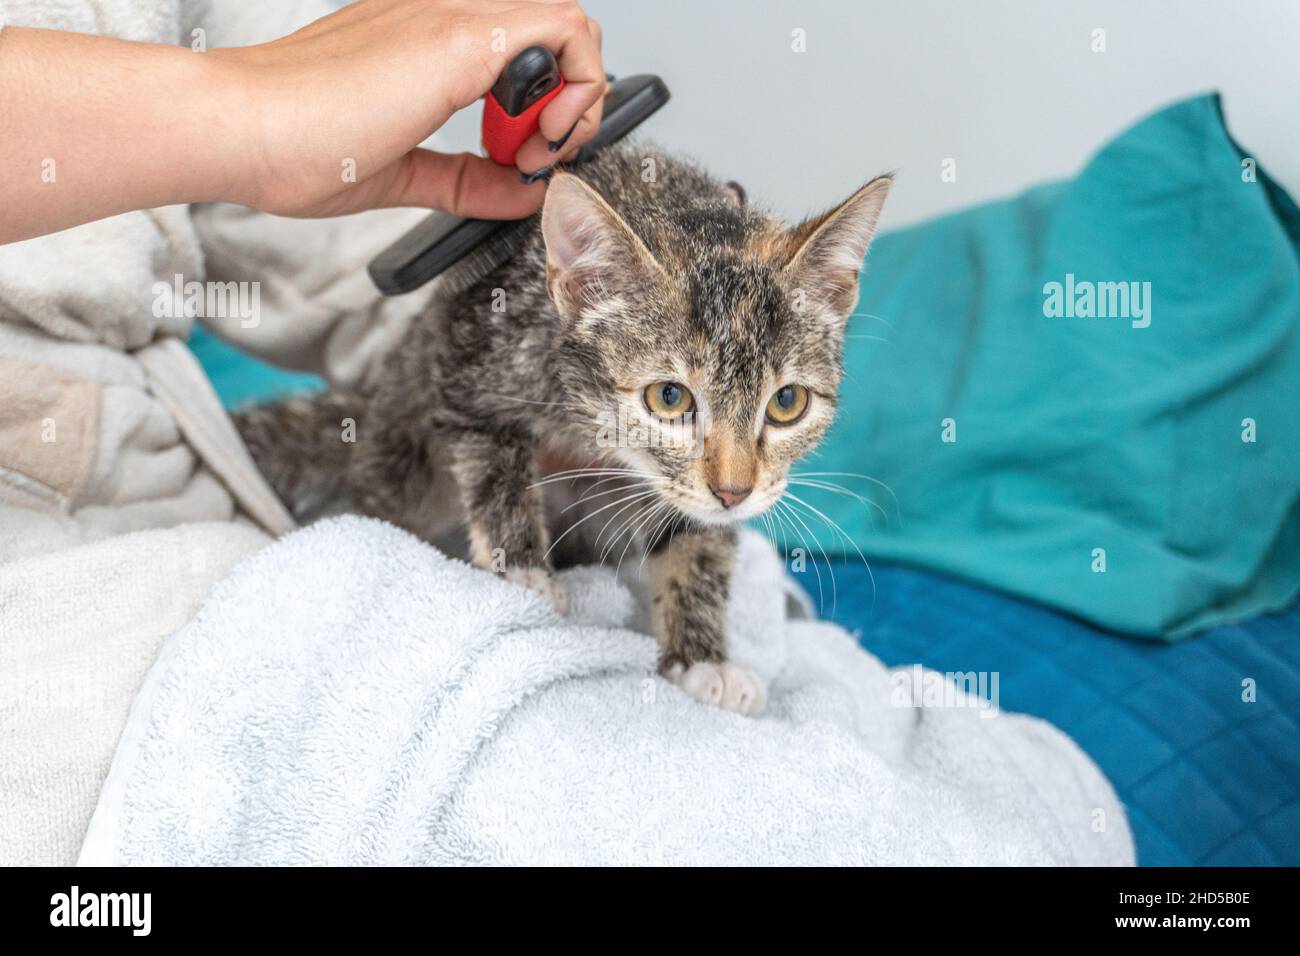 A hand of an unrecognizable person combing a cat Stock Photo